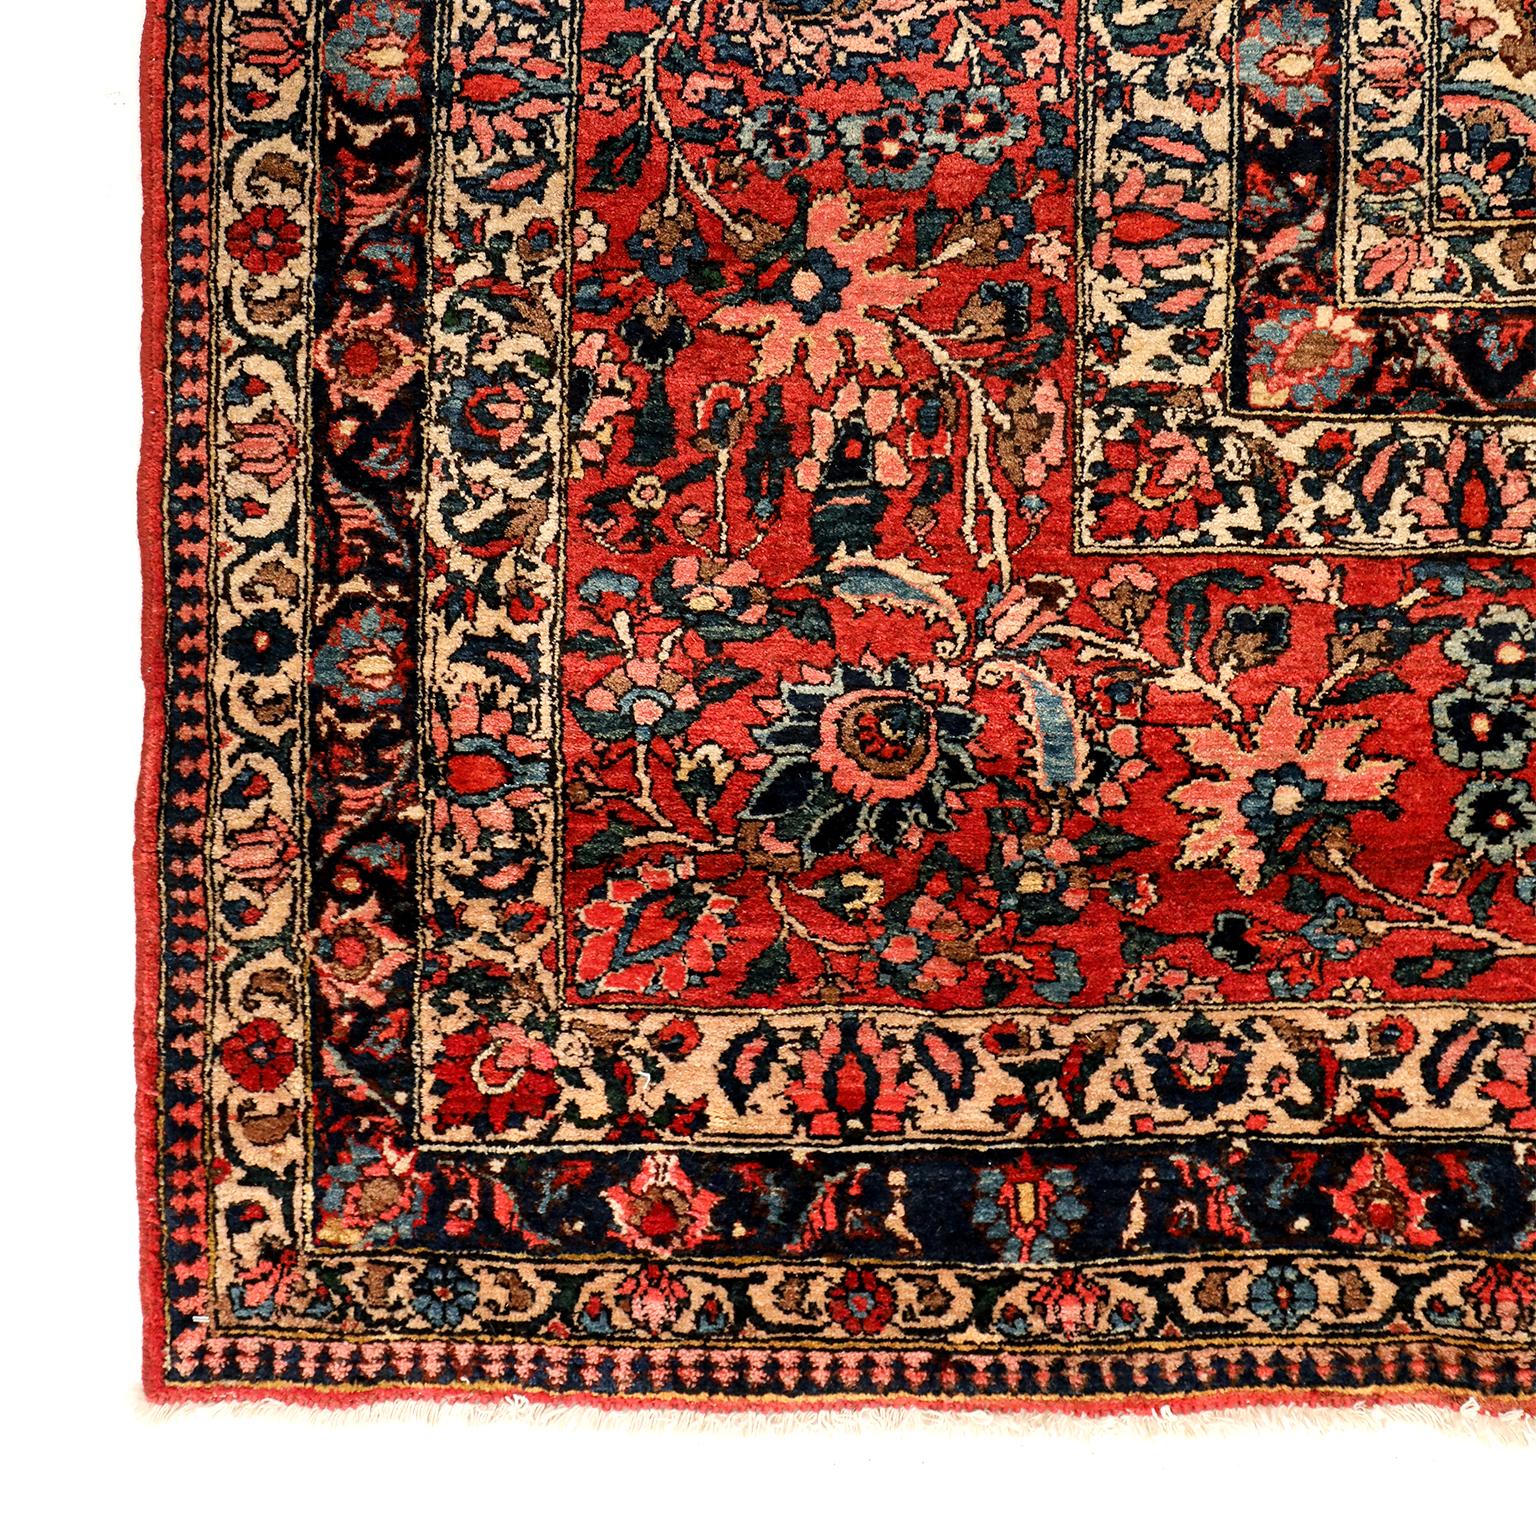 This Bakhtiari Persian carpet circa 1910 in pure wool and vegetable dyes features an intricate central medallion and multiple borders. Detailed floral motifs lend movement and depth to the design, which is further balanced by the carpet's organic